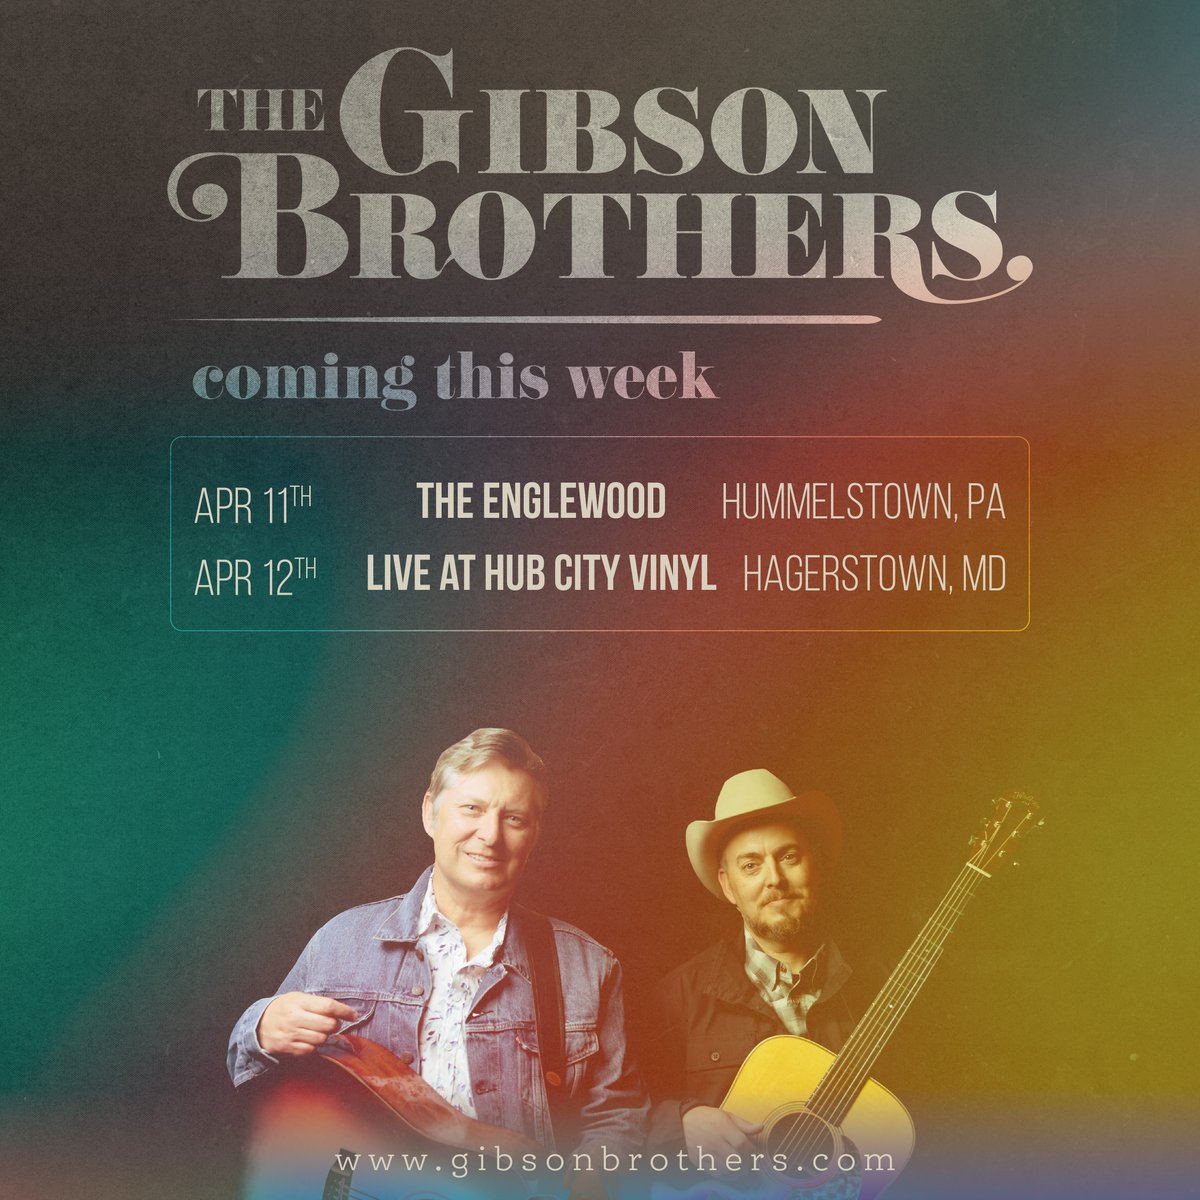 This week we'll be at @The_Englewood and at Hub City Vinyl. We hope to see ya there 🤝 #livemusic #thegibsonbrothers #theenglewood #hubcityvinyl